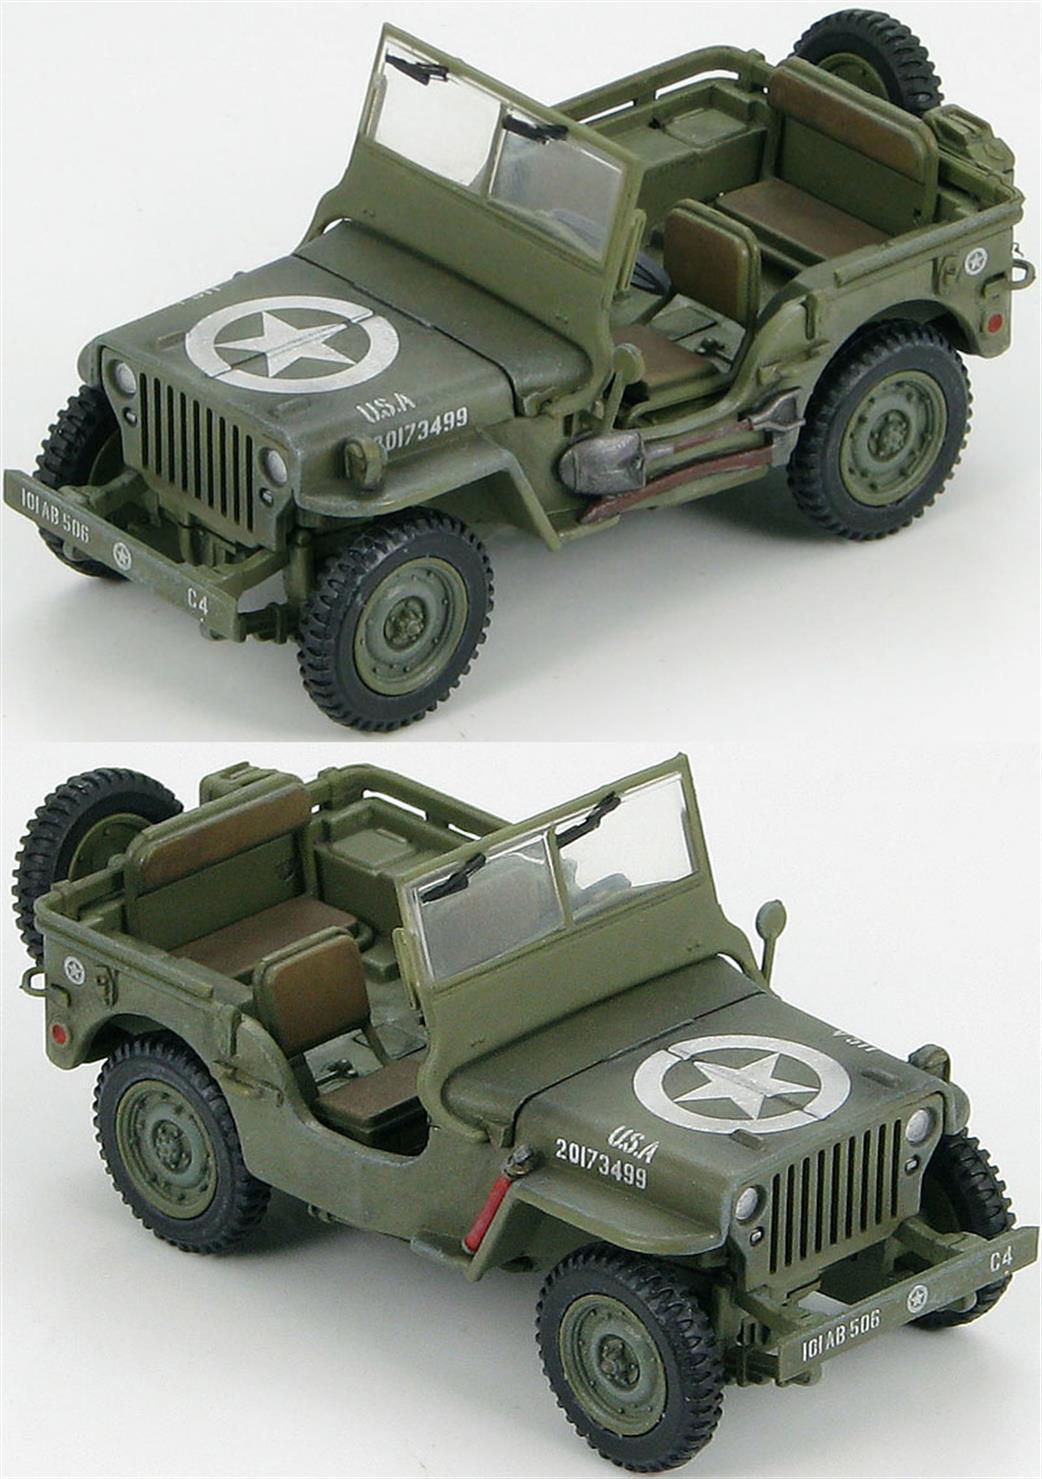 Hobby Master HG1601 US Willys Jeep 101st Airborne iv., 506th A.B. Regiment, Company `C`, Normandy, 6 June 1944 1/48